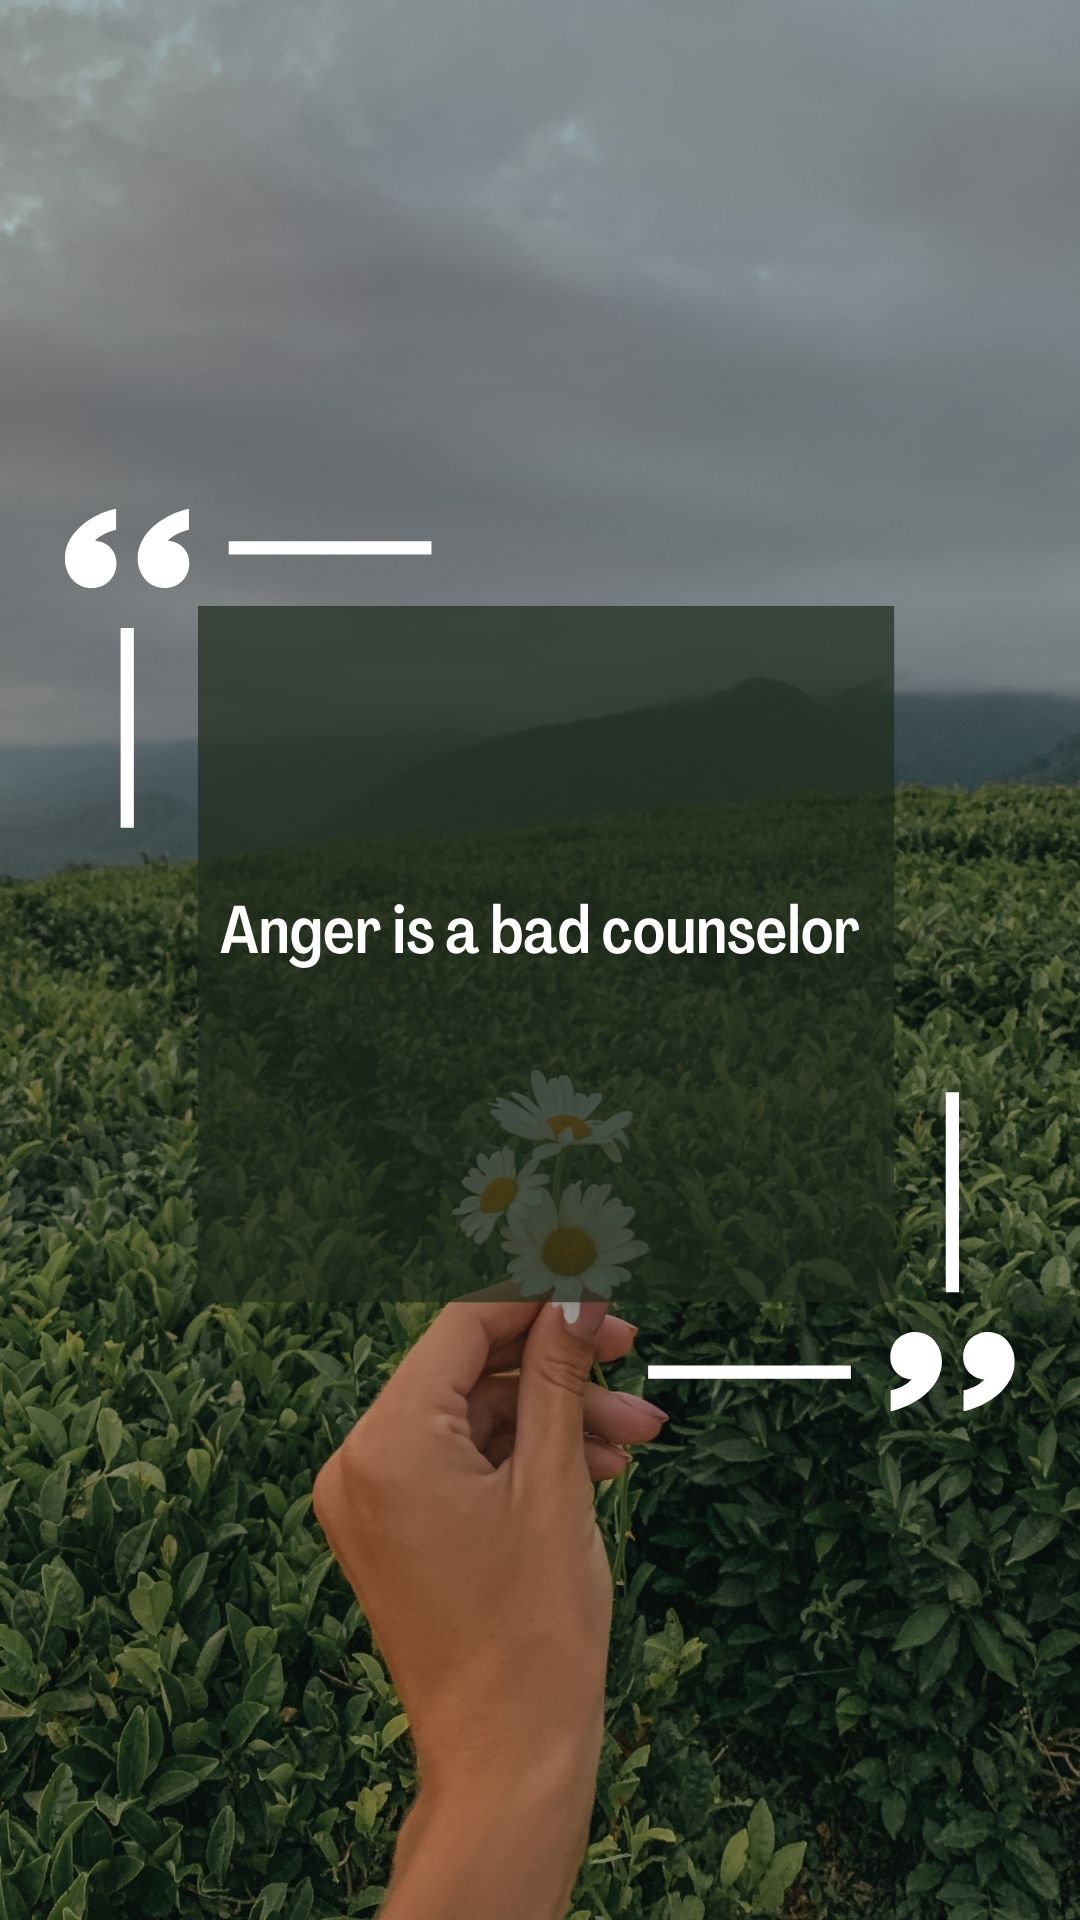 Anger is a bad counselor